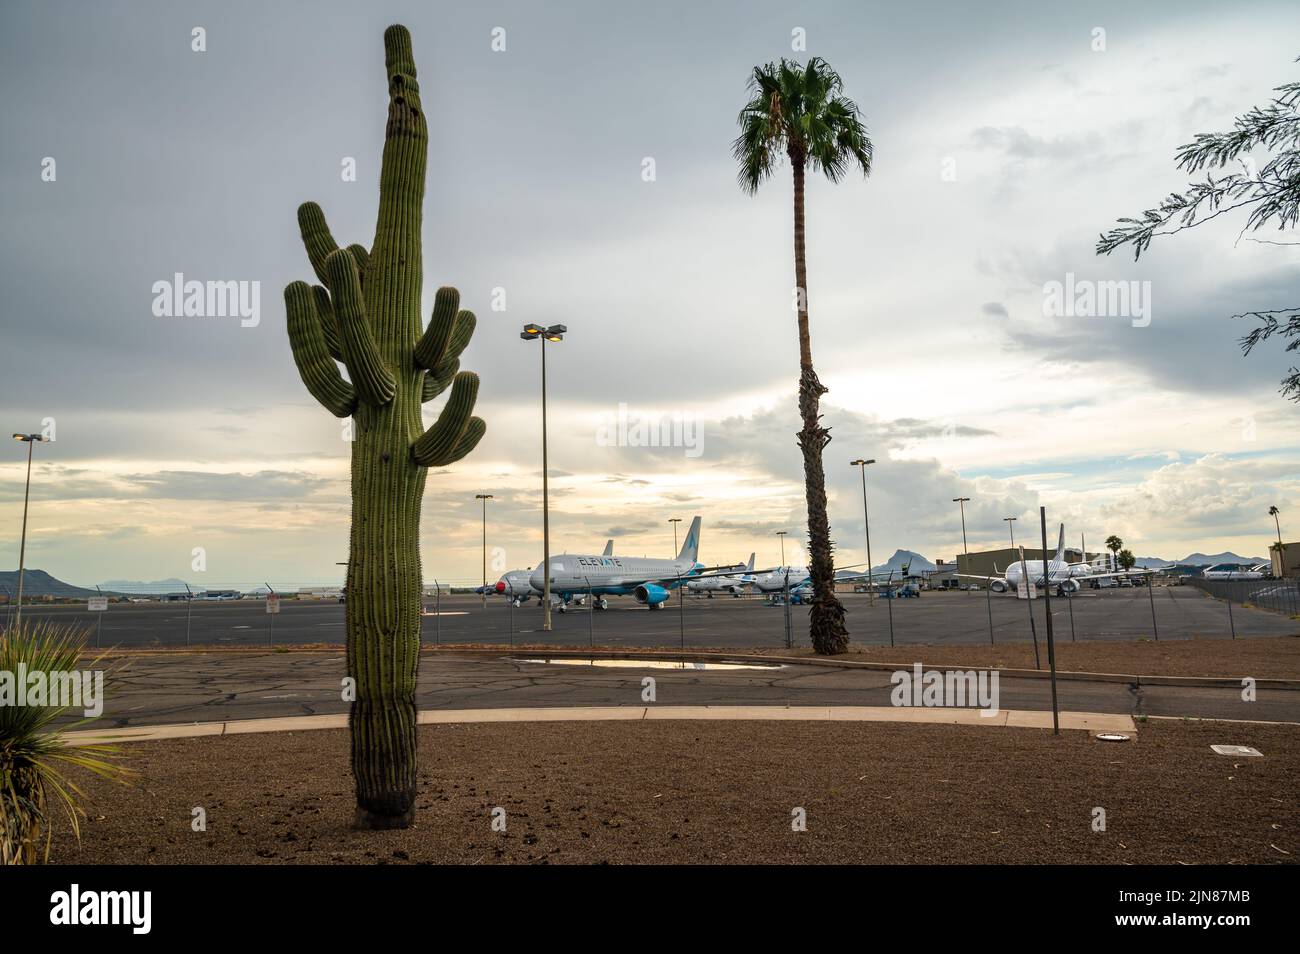 Airplanes on tarmac at Tucson airport. Saguaro cactus in foreground.  Stock Photo